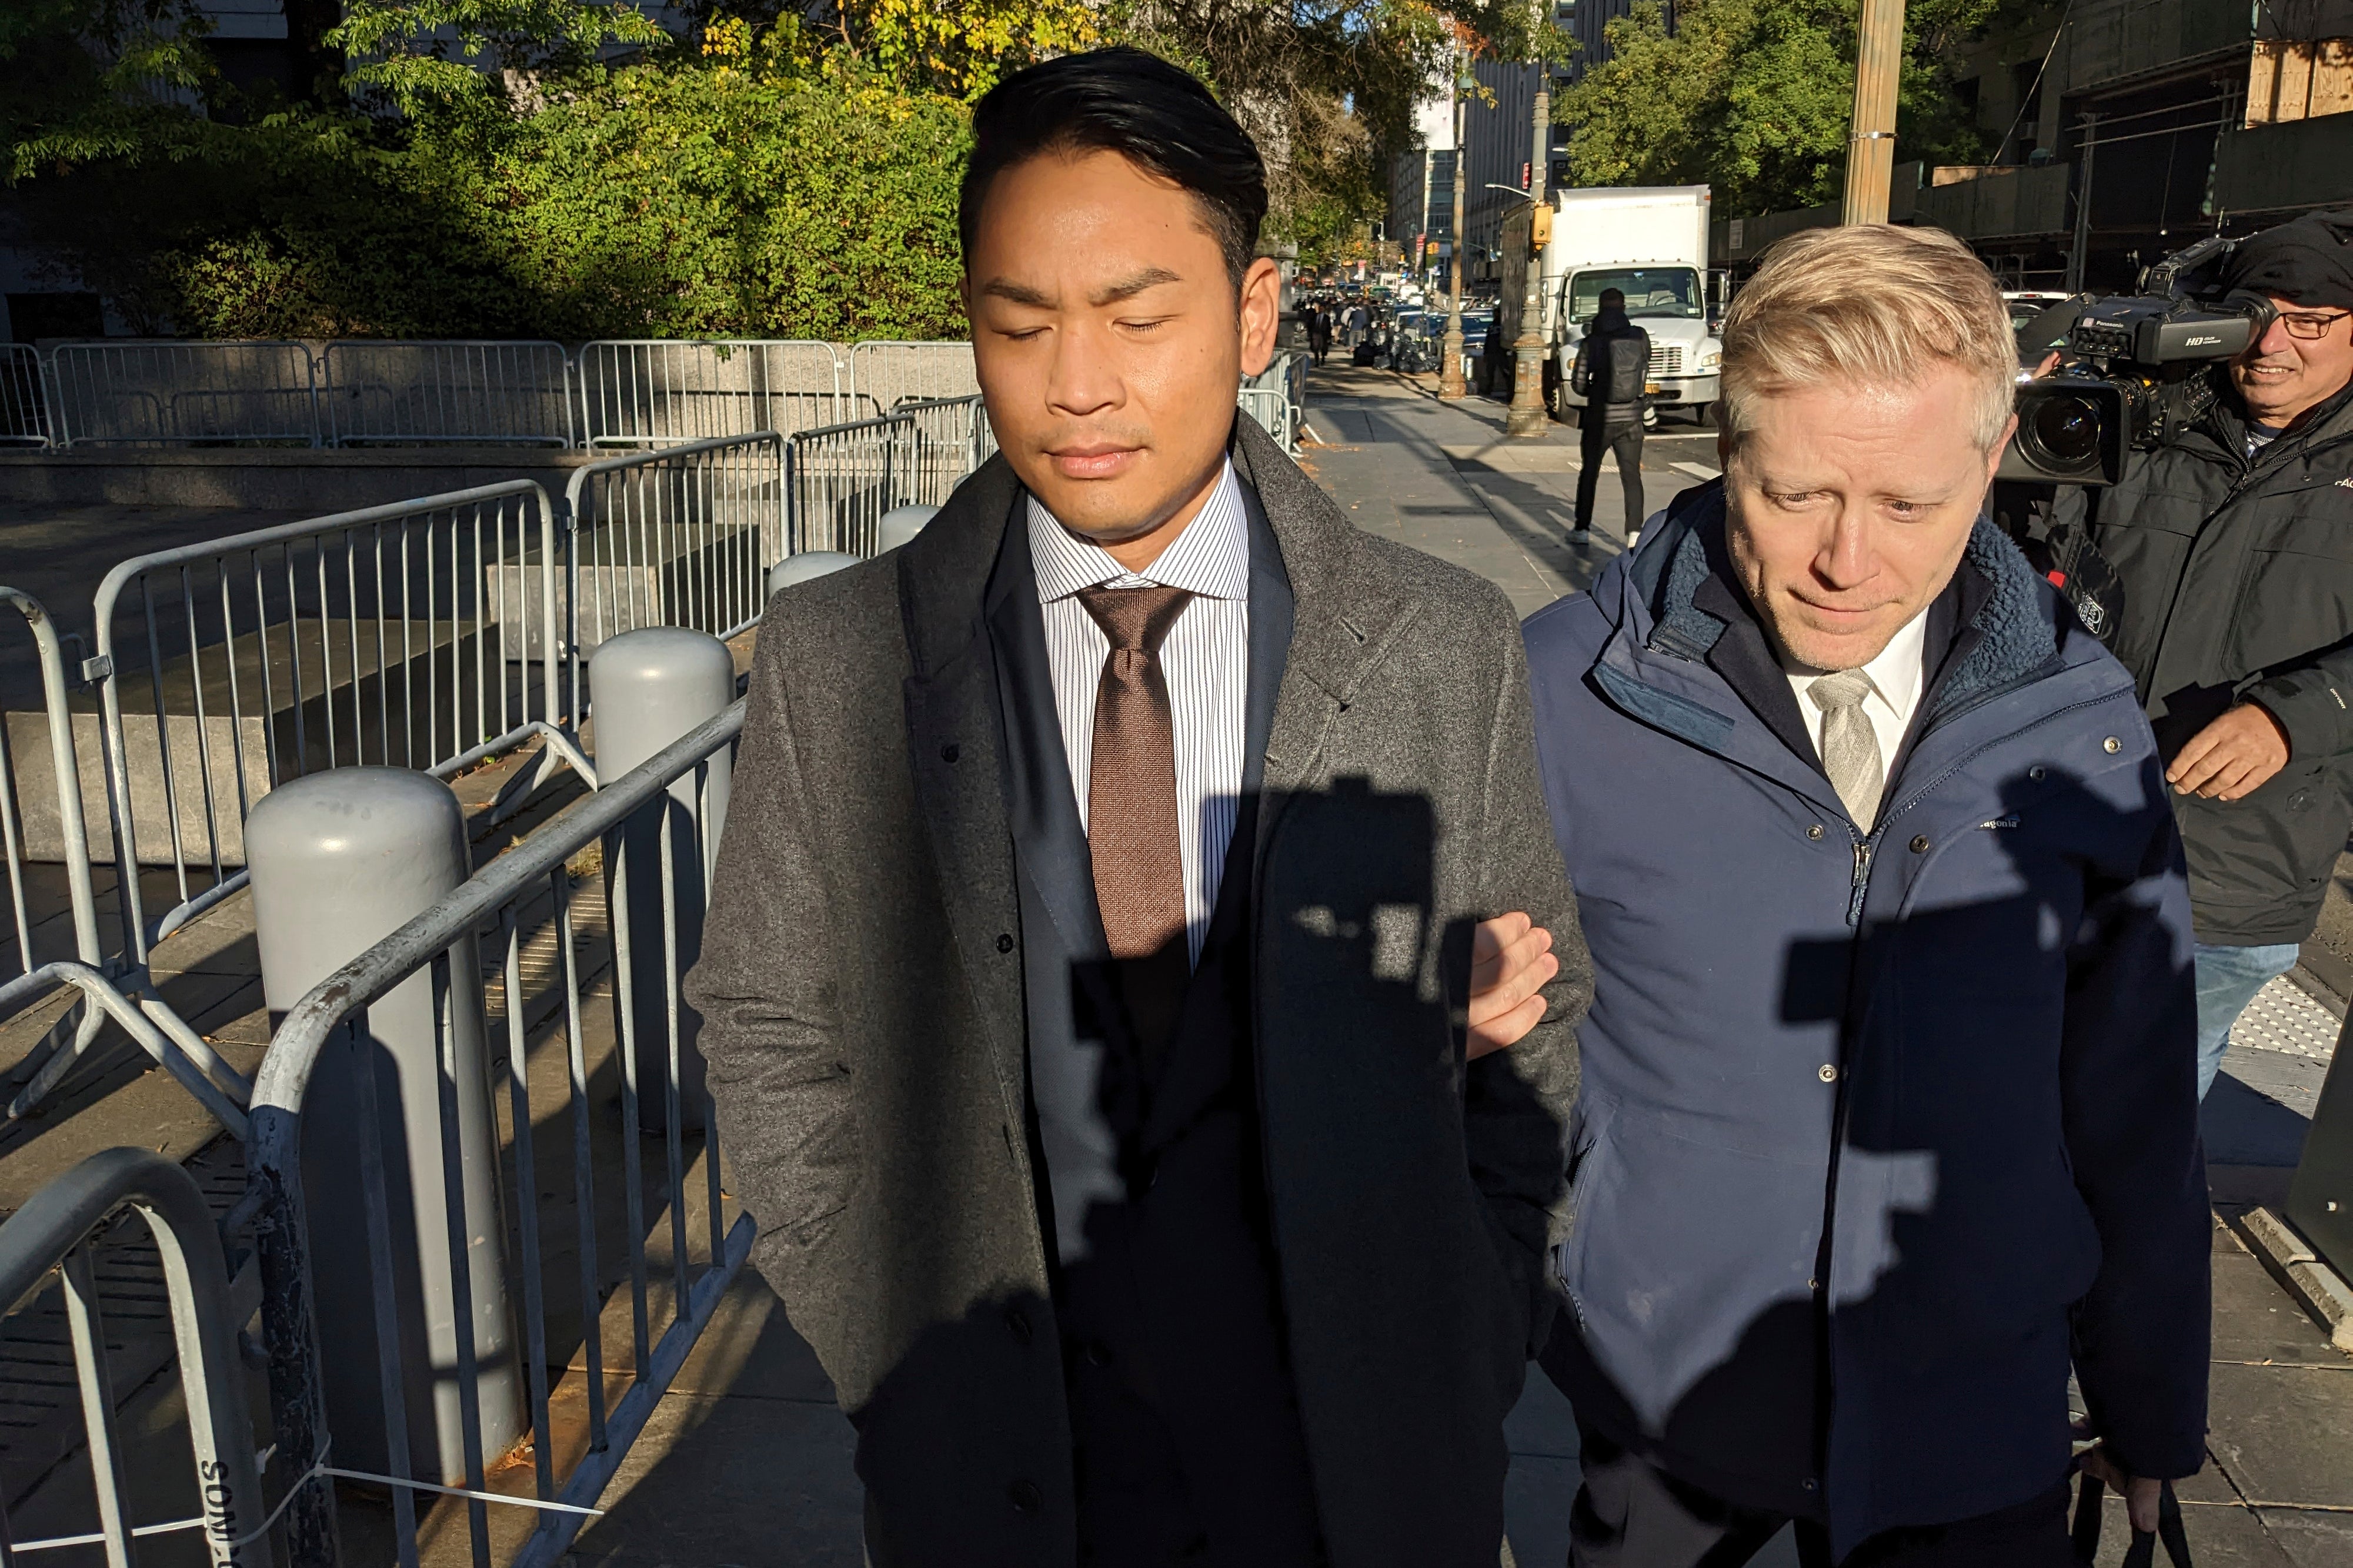 Actor Anthony Rapp, right, and his partner Ken Ithiphol arrive at the federal courthouse in lower Manhattan